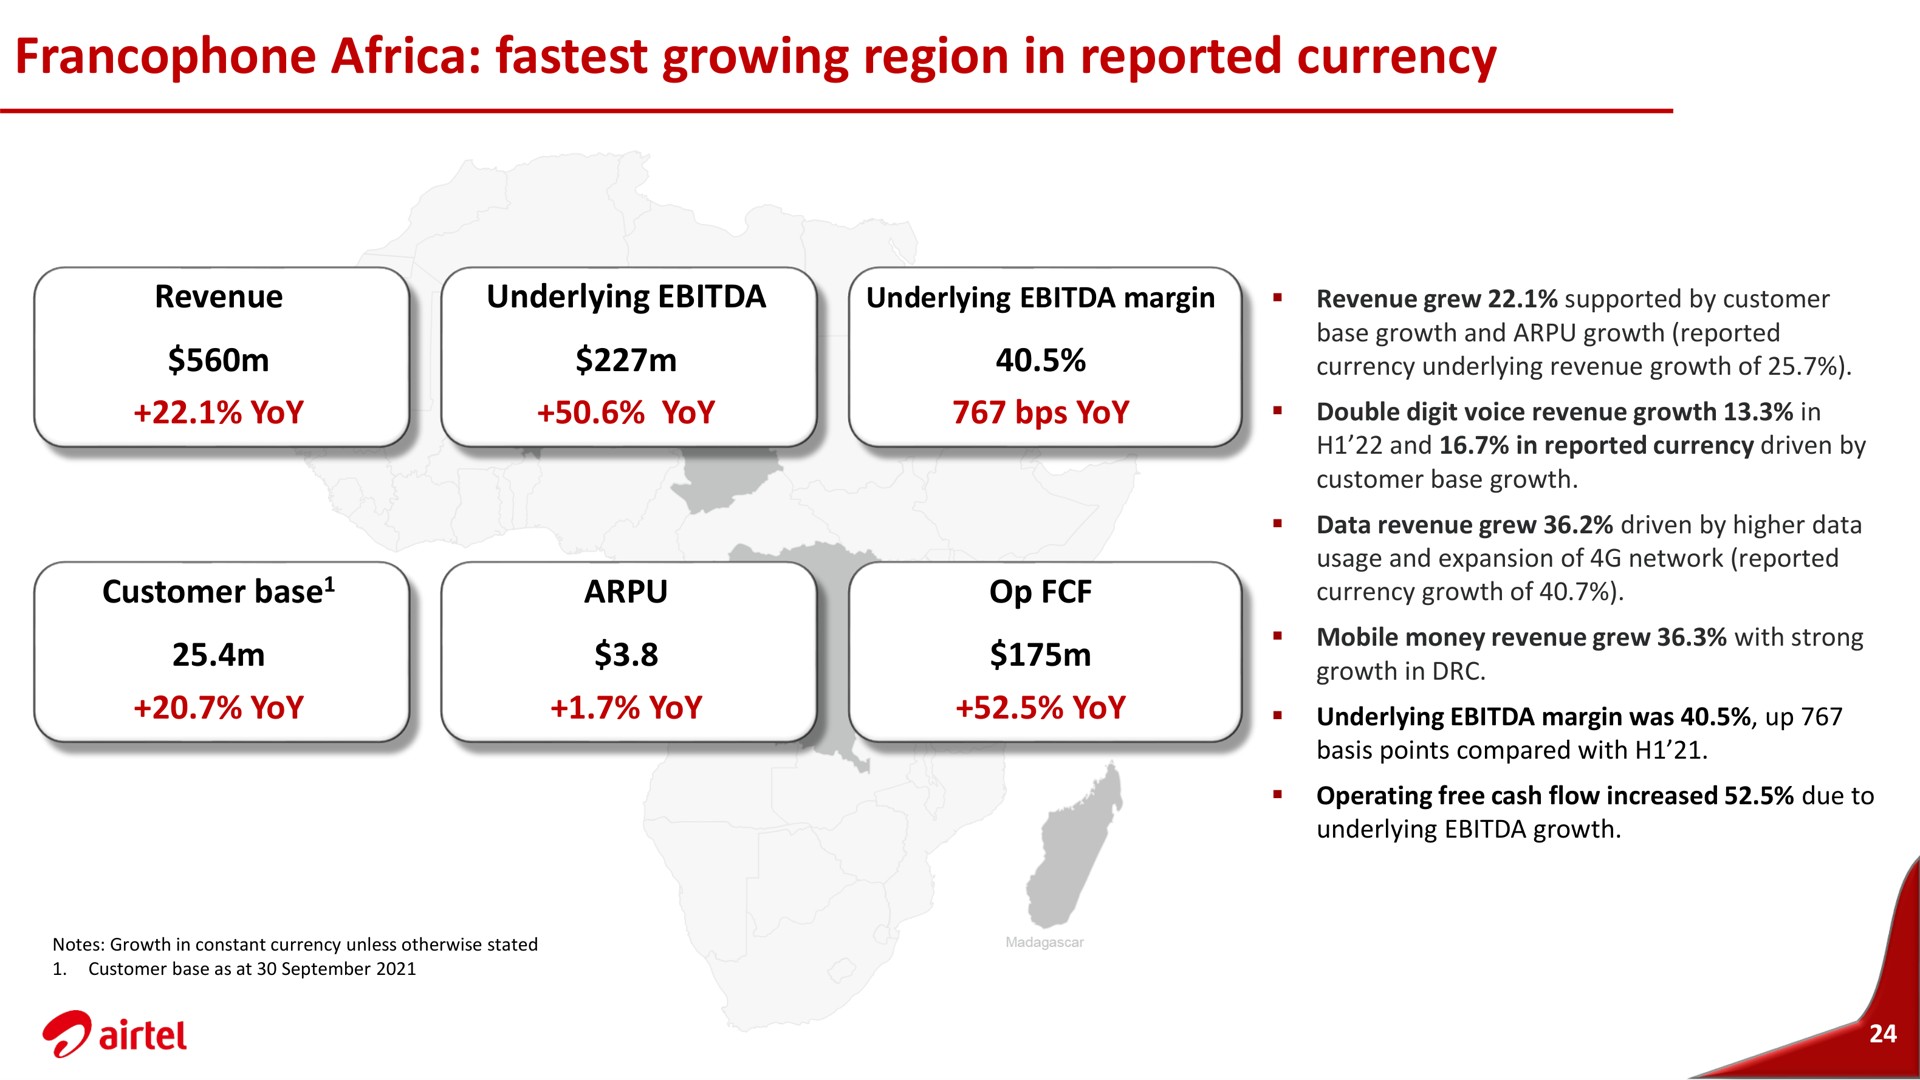 growing region in reported currency growth | Airtel Africa